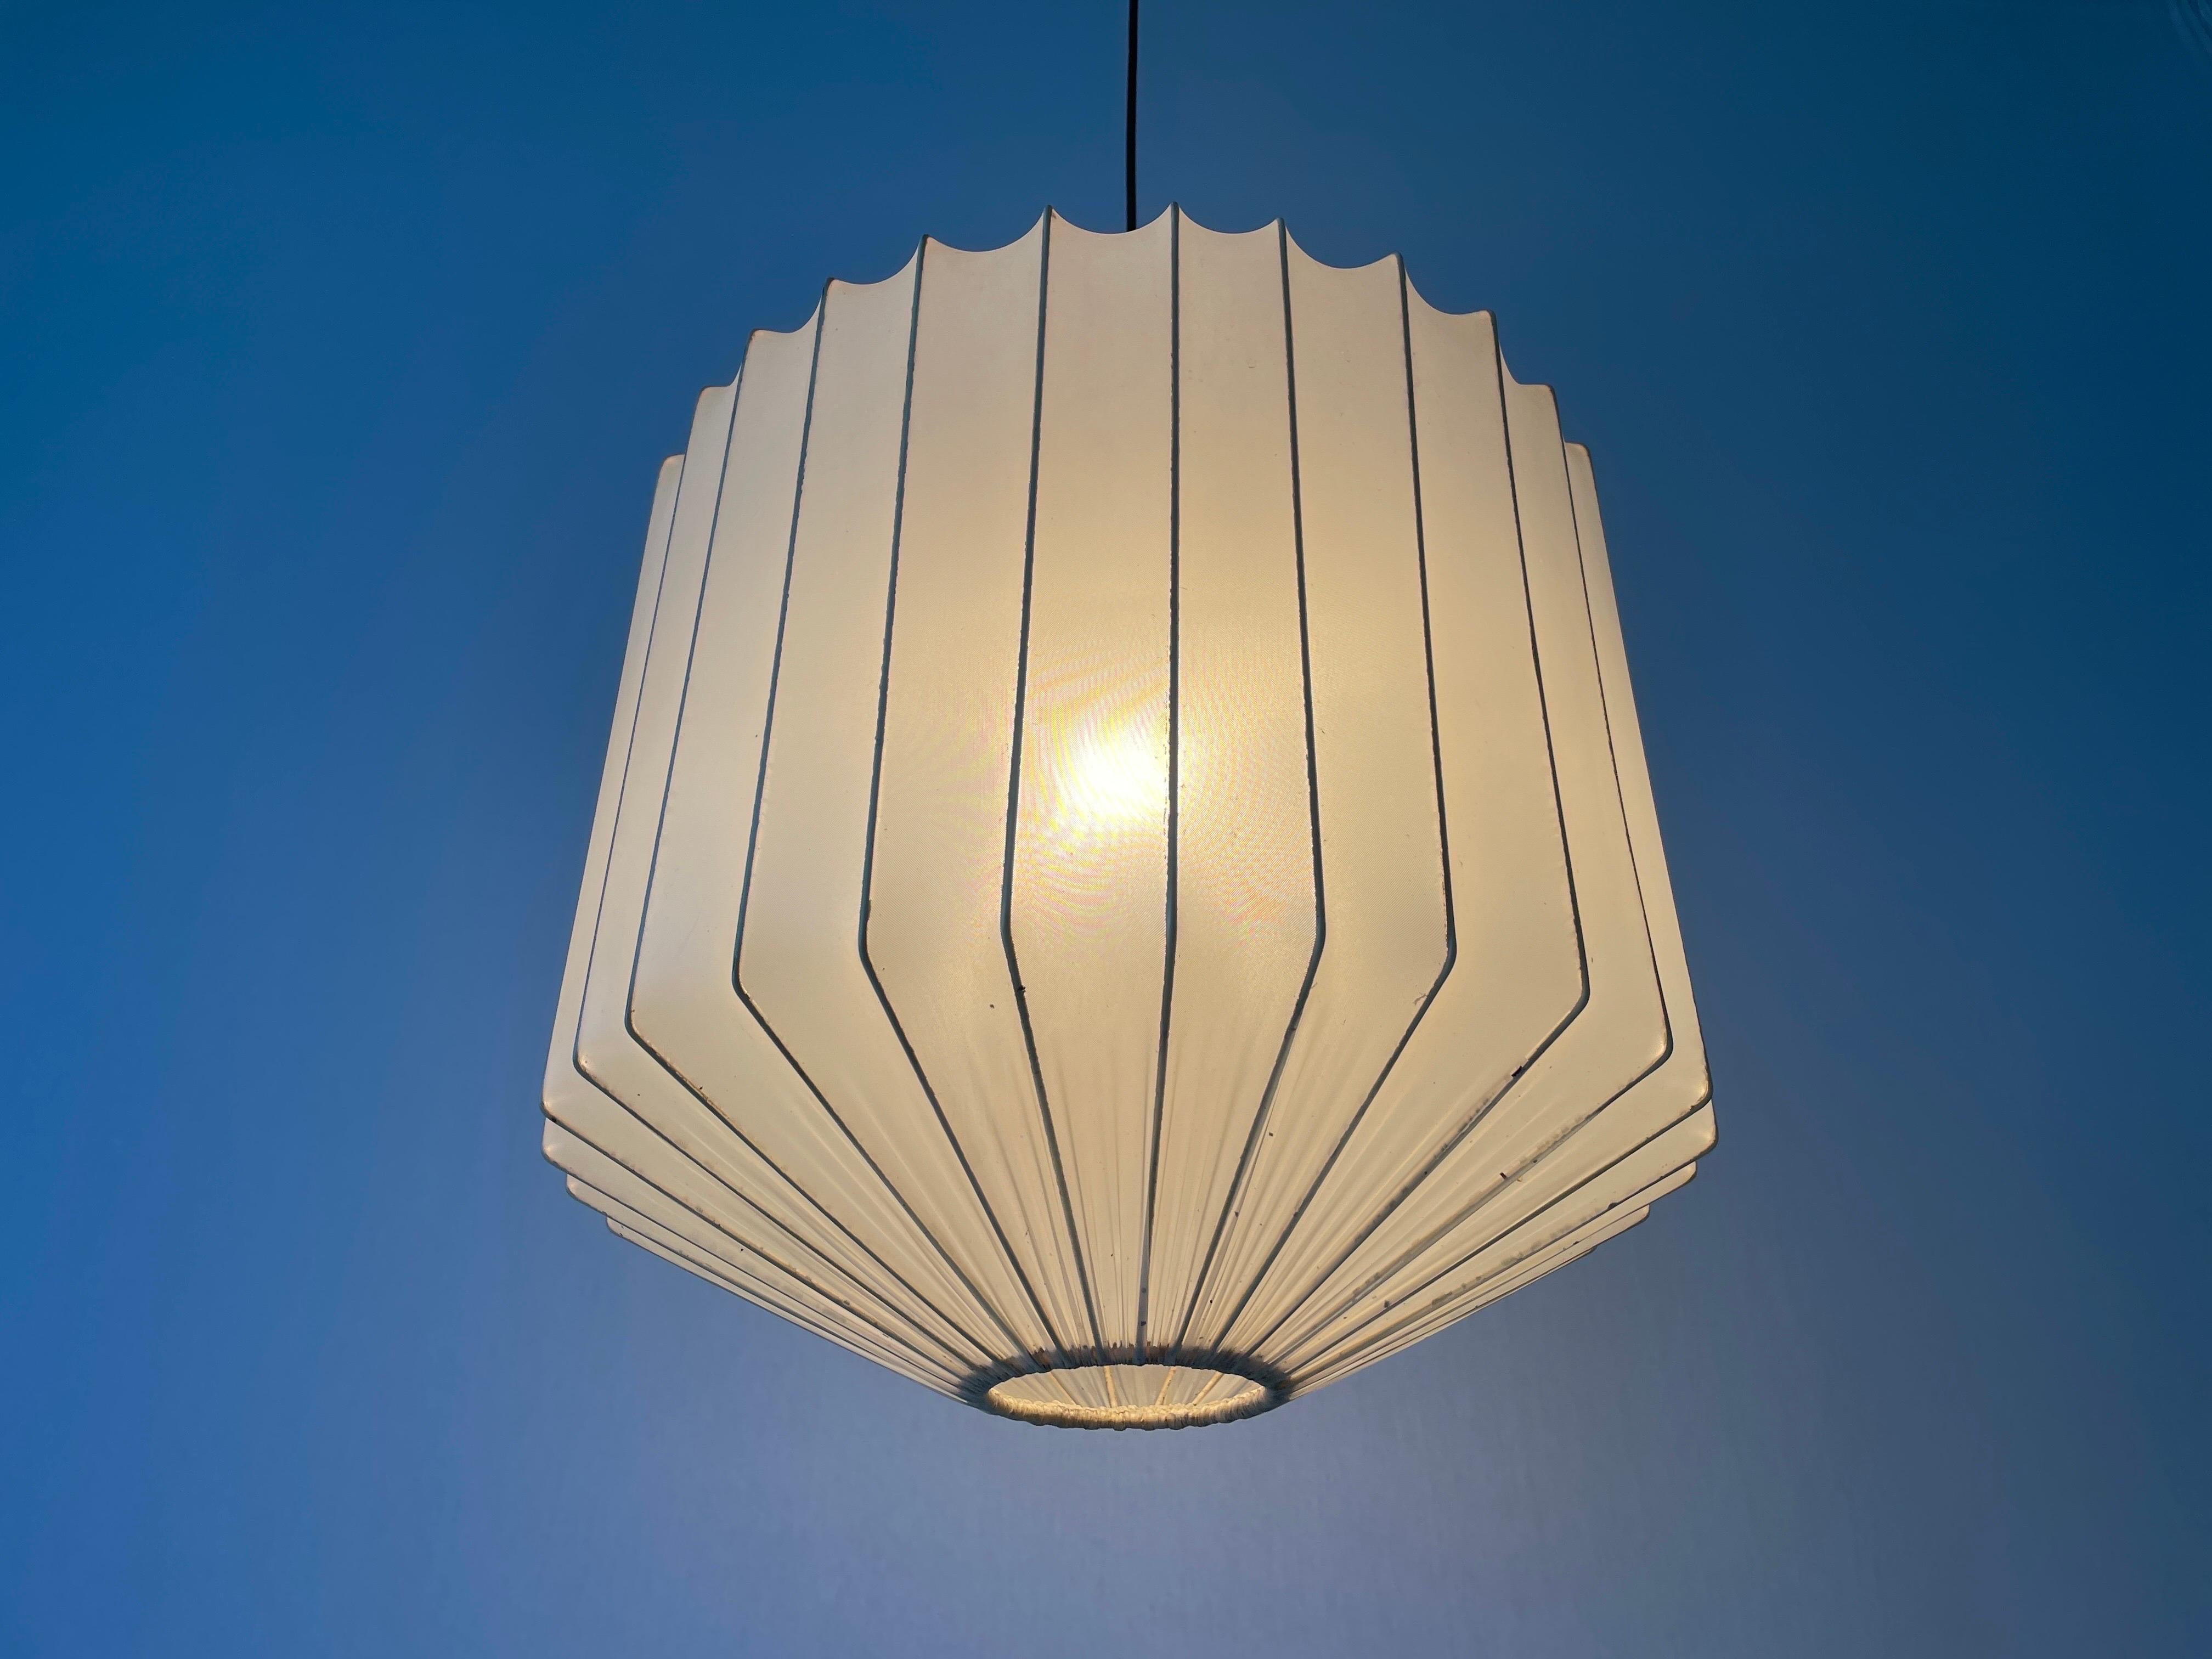 Satin Silk Fabric Ceiling Lamp in Cocoon Shape, 1960s, Italy For Sale 9